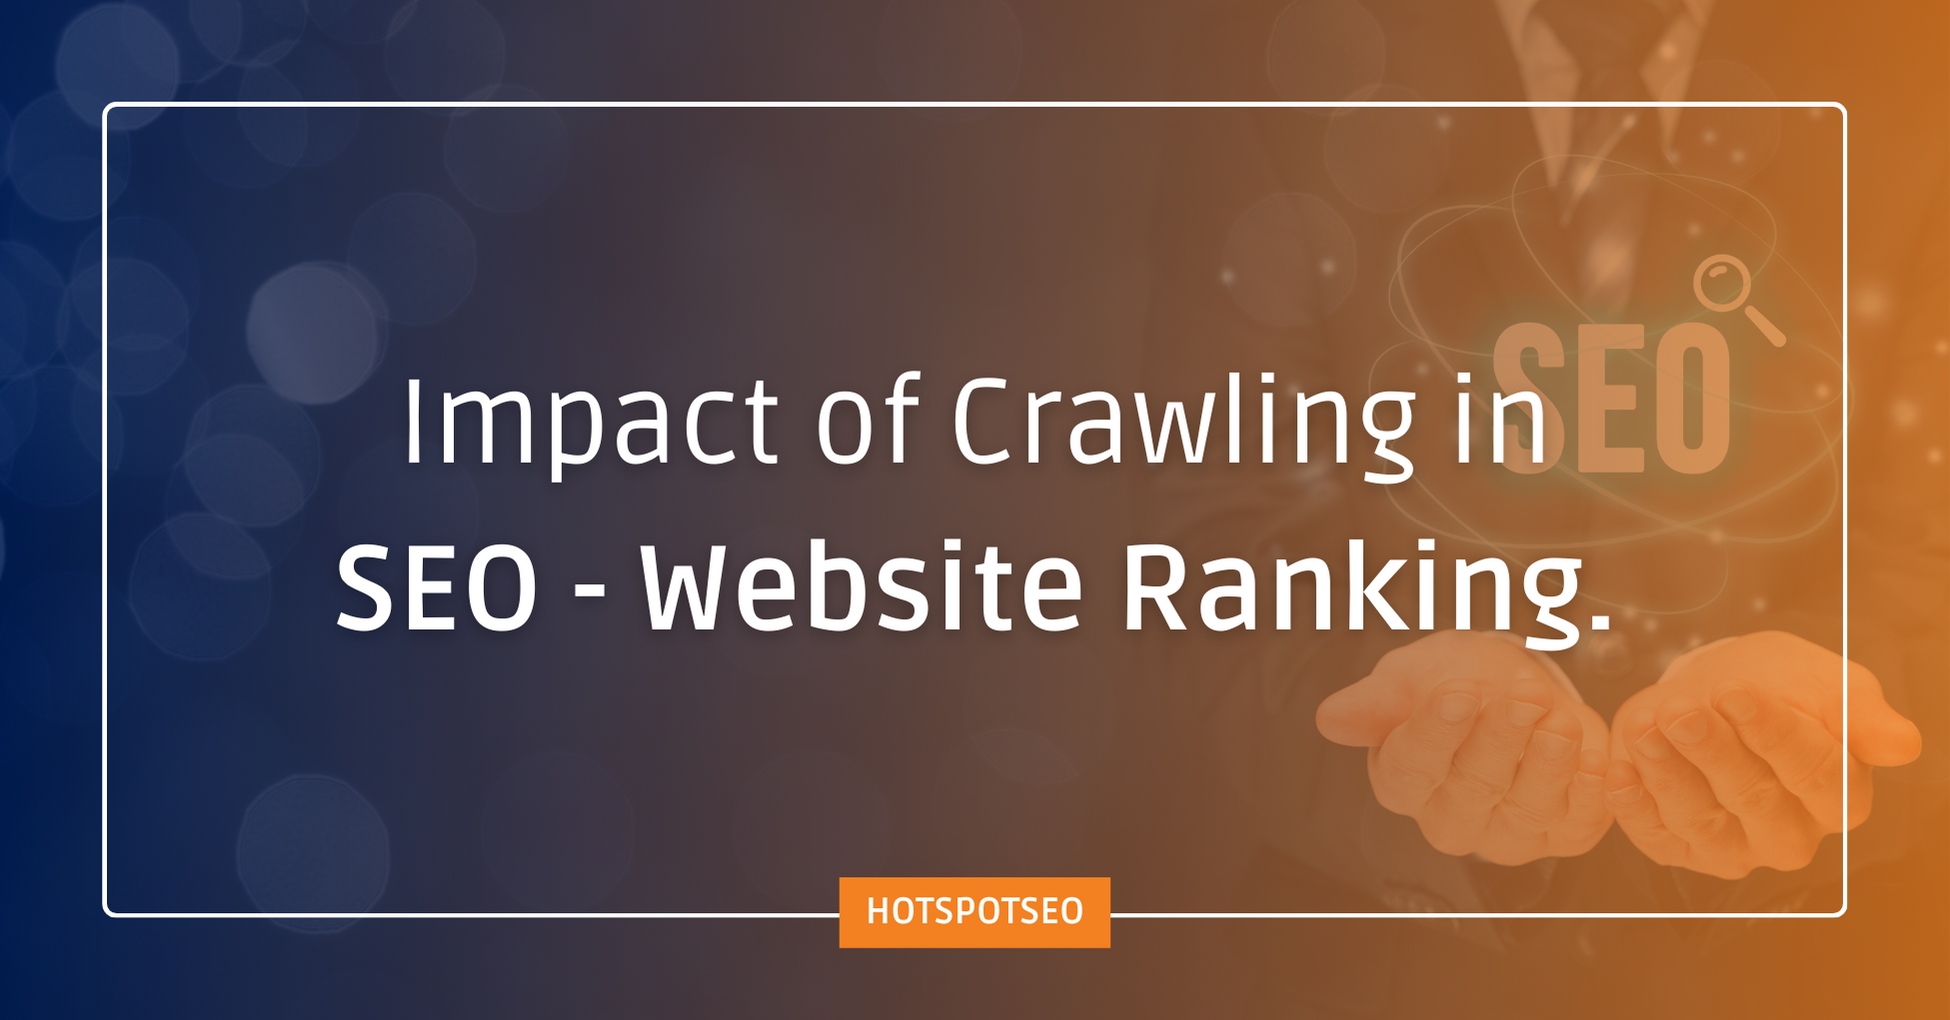 What is Crawling in SEO ?